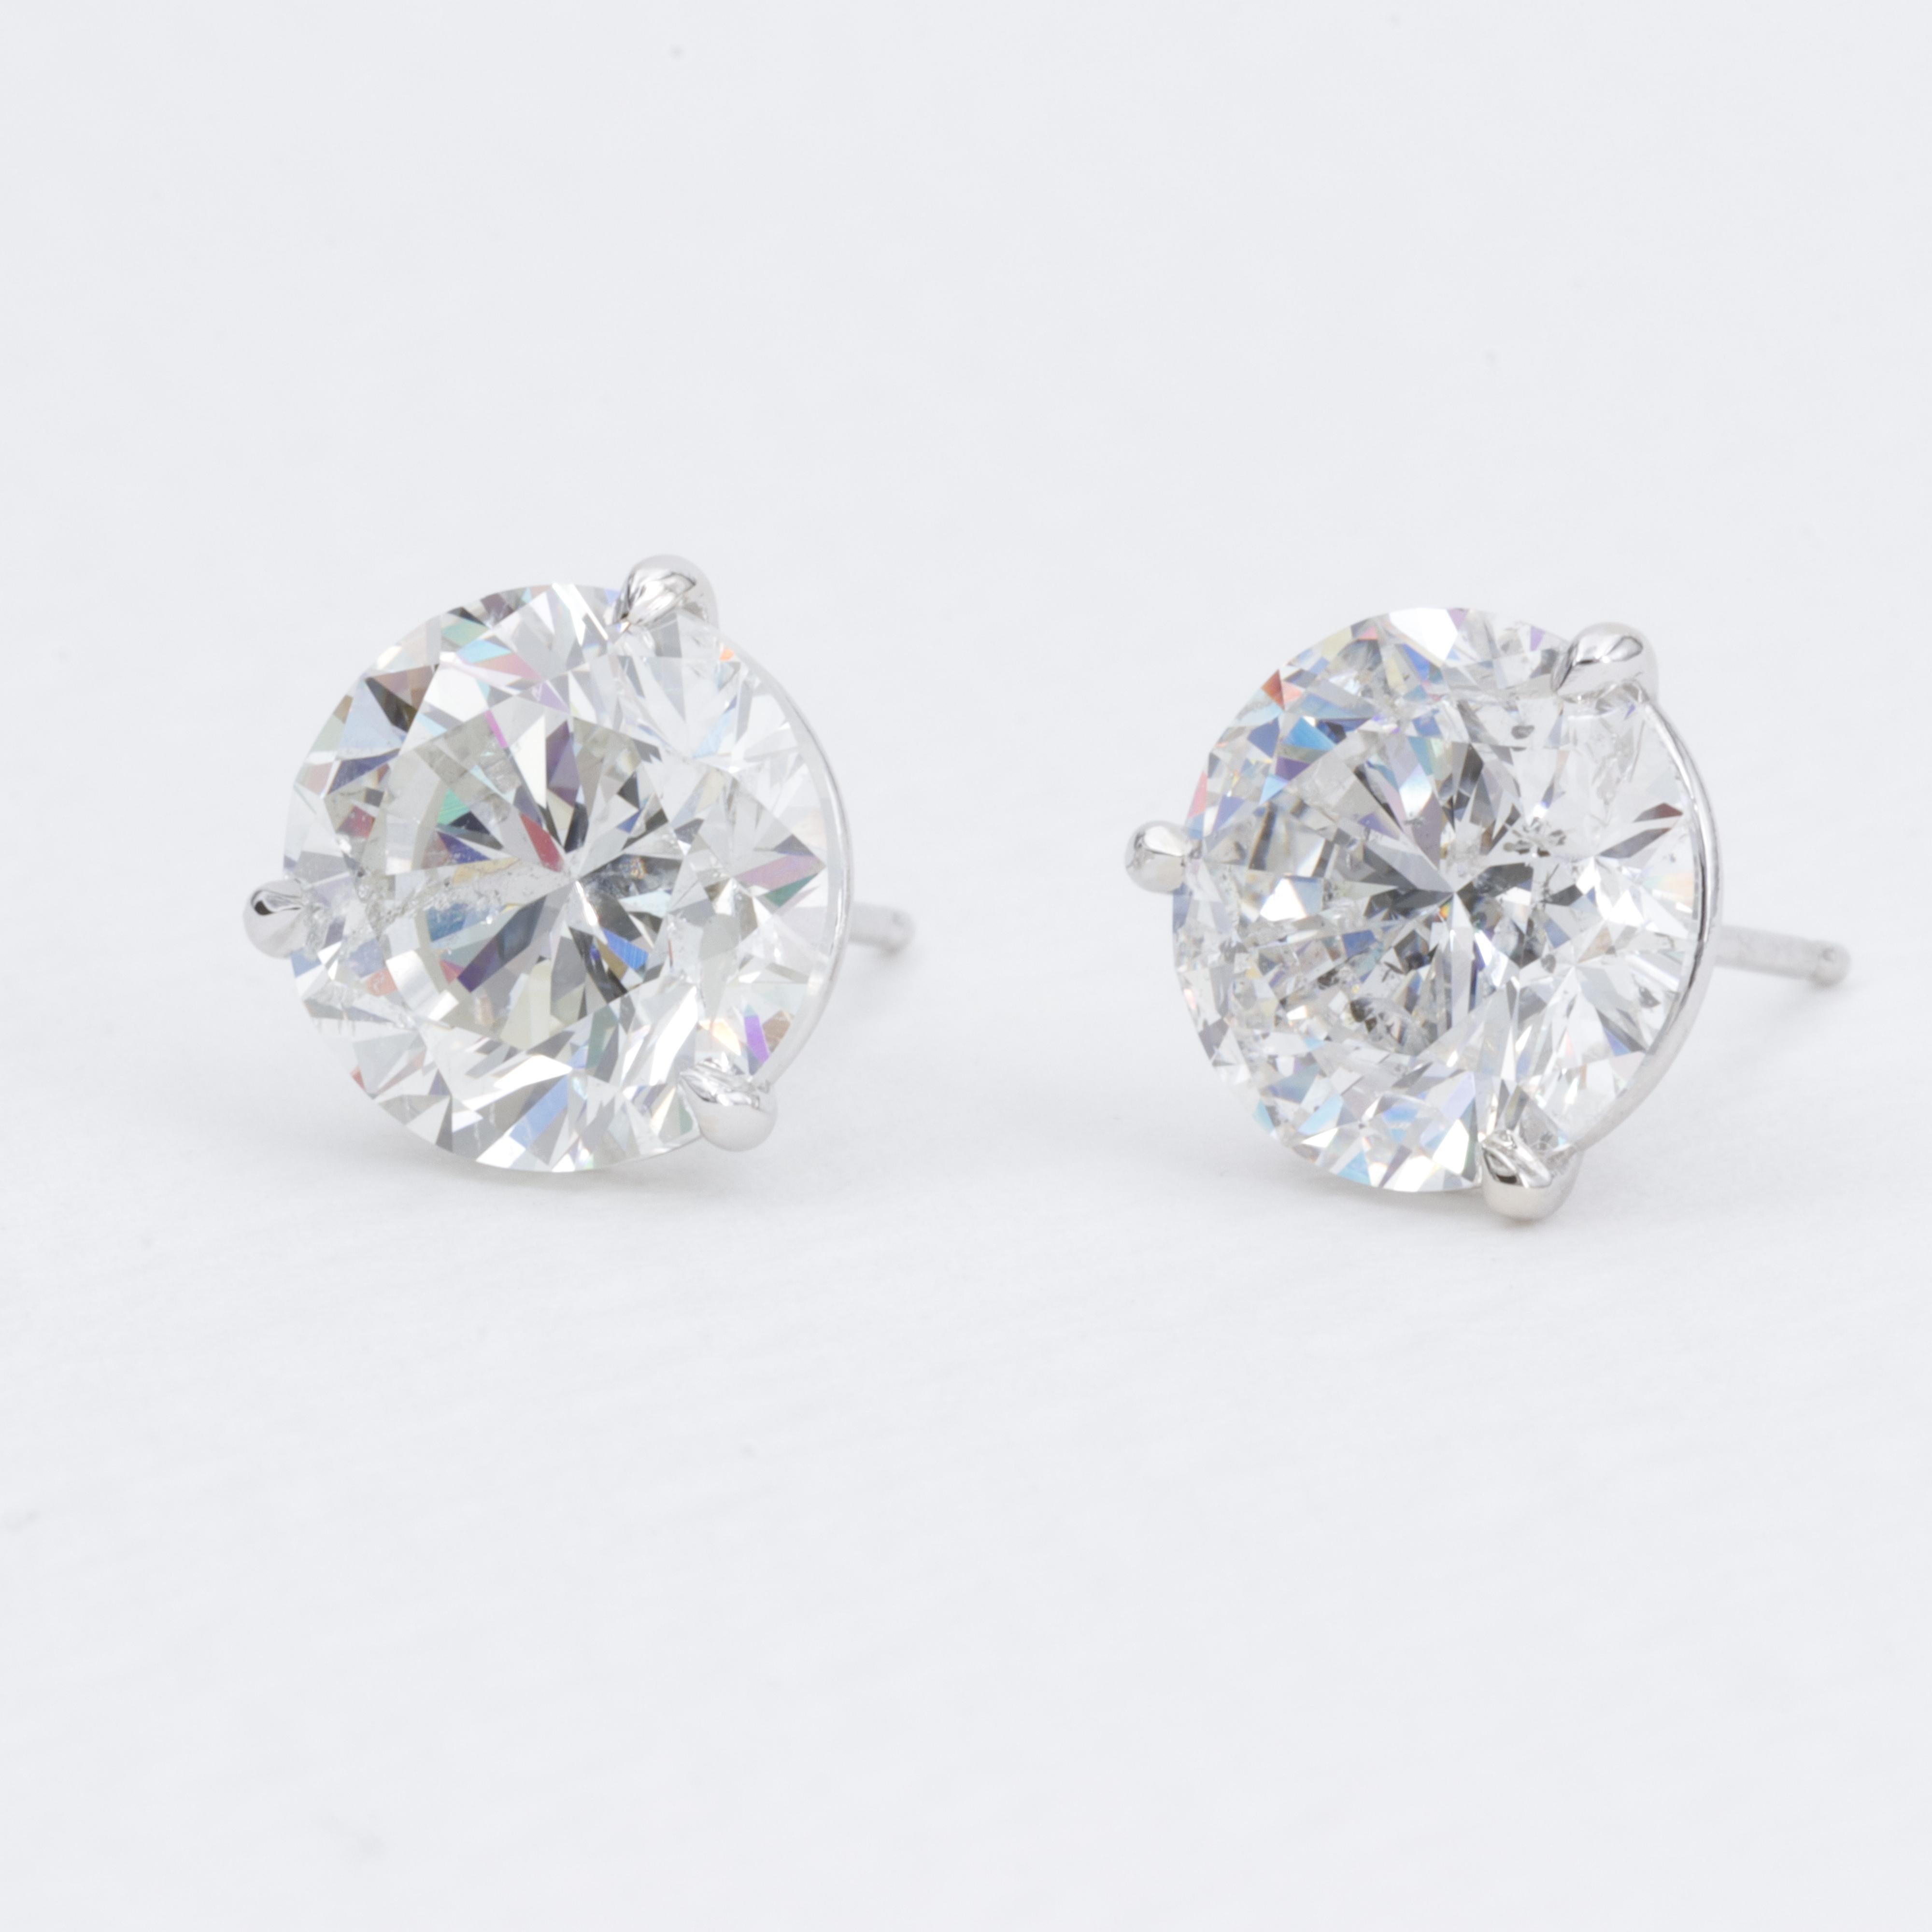 7.50 Carat GIA Natural Diamond Stud Earrings in White Gold 4 Prong Settings For Sale 1